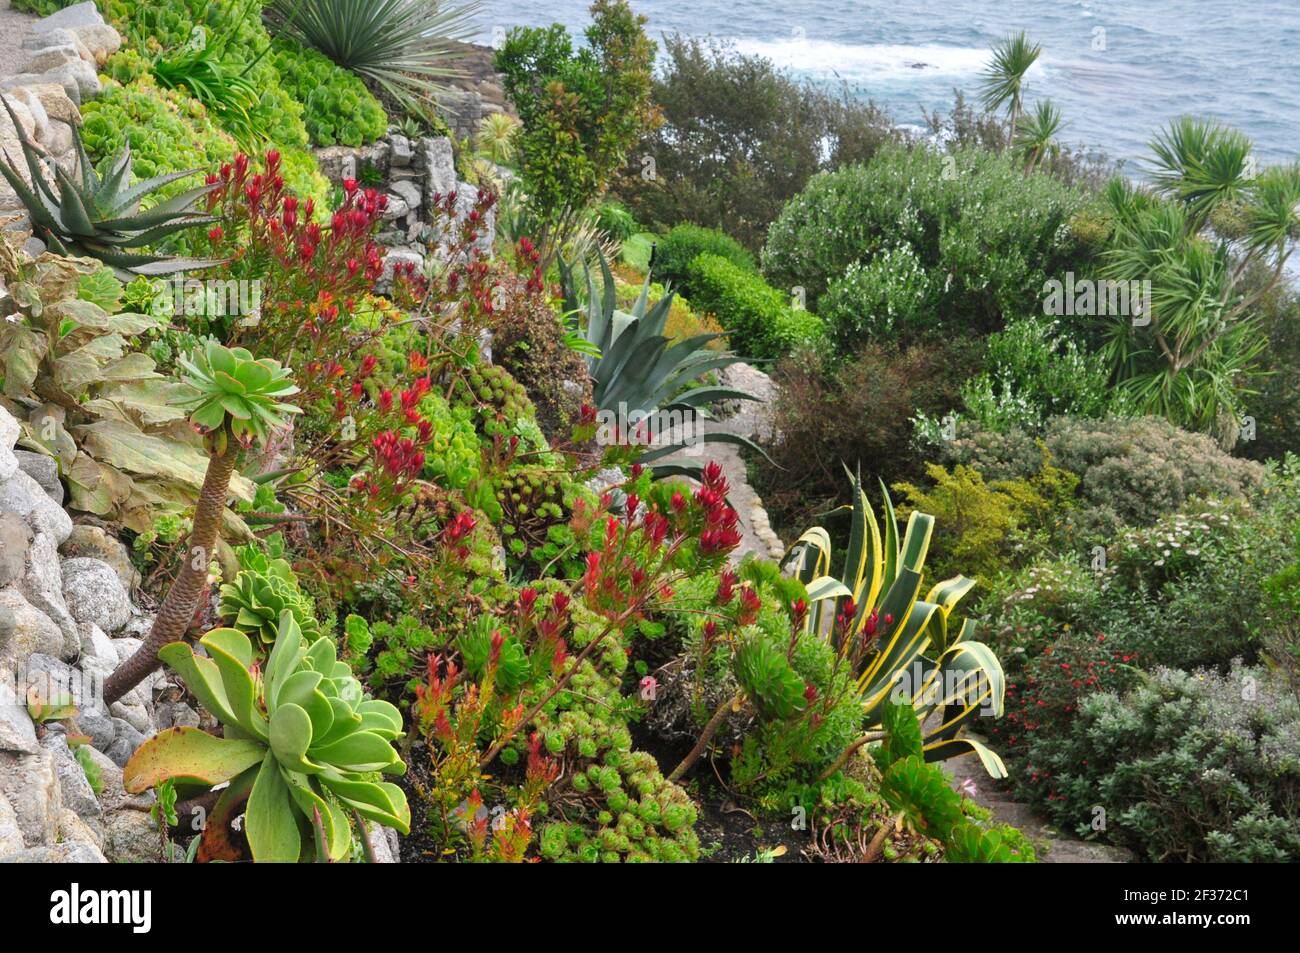 Colourful succulents and sub-tropical plants on the steep rocky gardens on the seaward side of St Michaels Mount off Marazion in Cornwall. UK Stock Photo